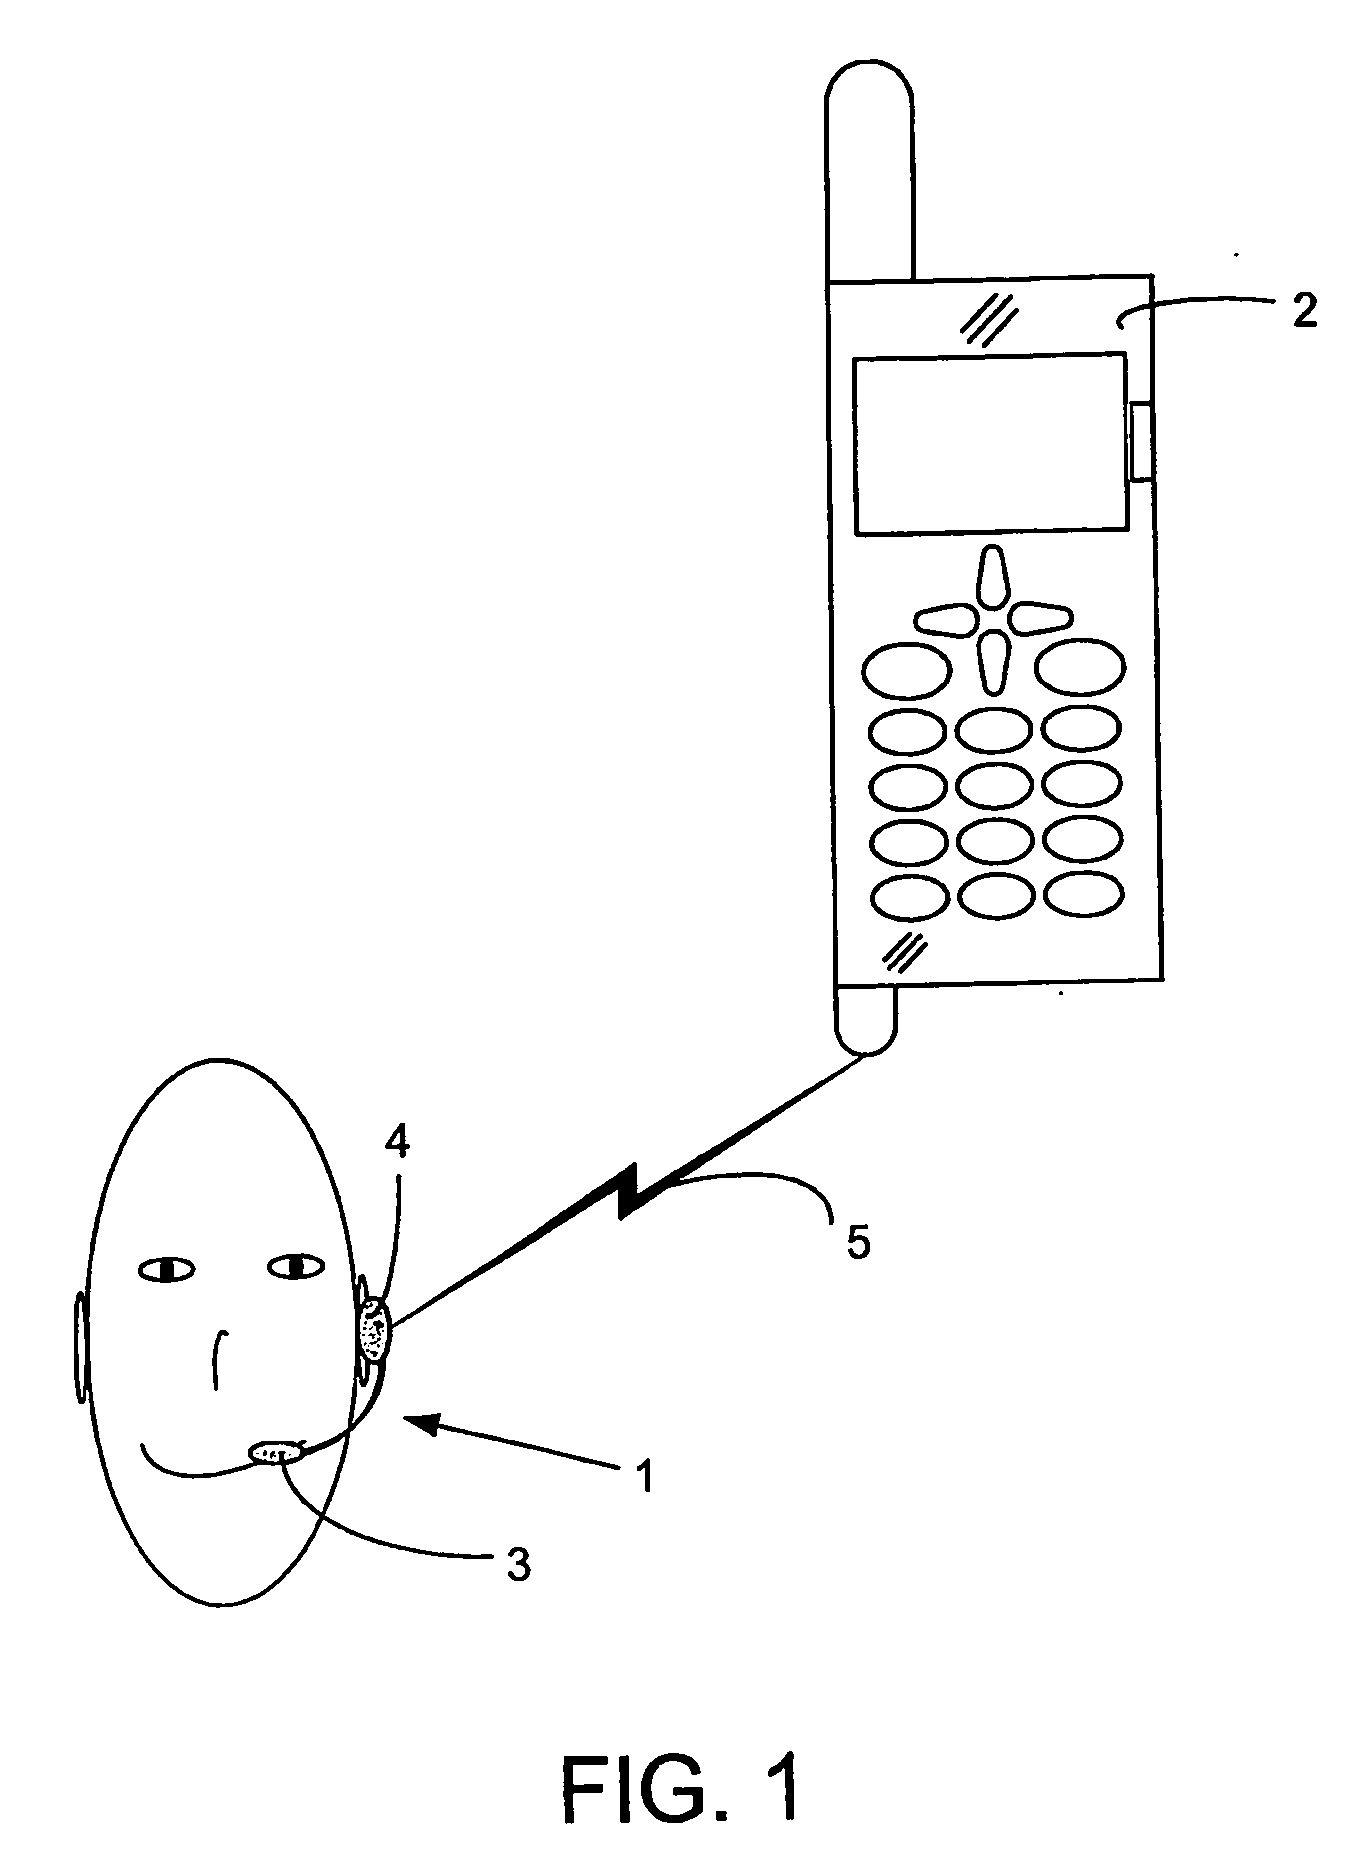 Wideband antena device with extended ground plane in a portable device